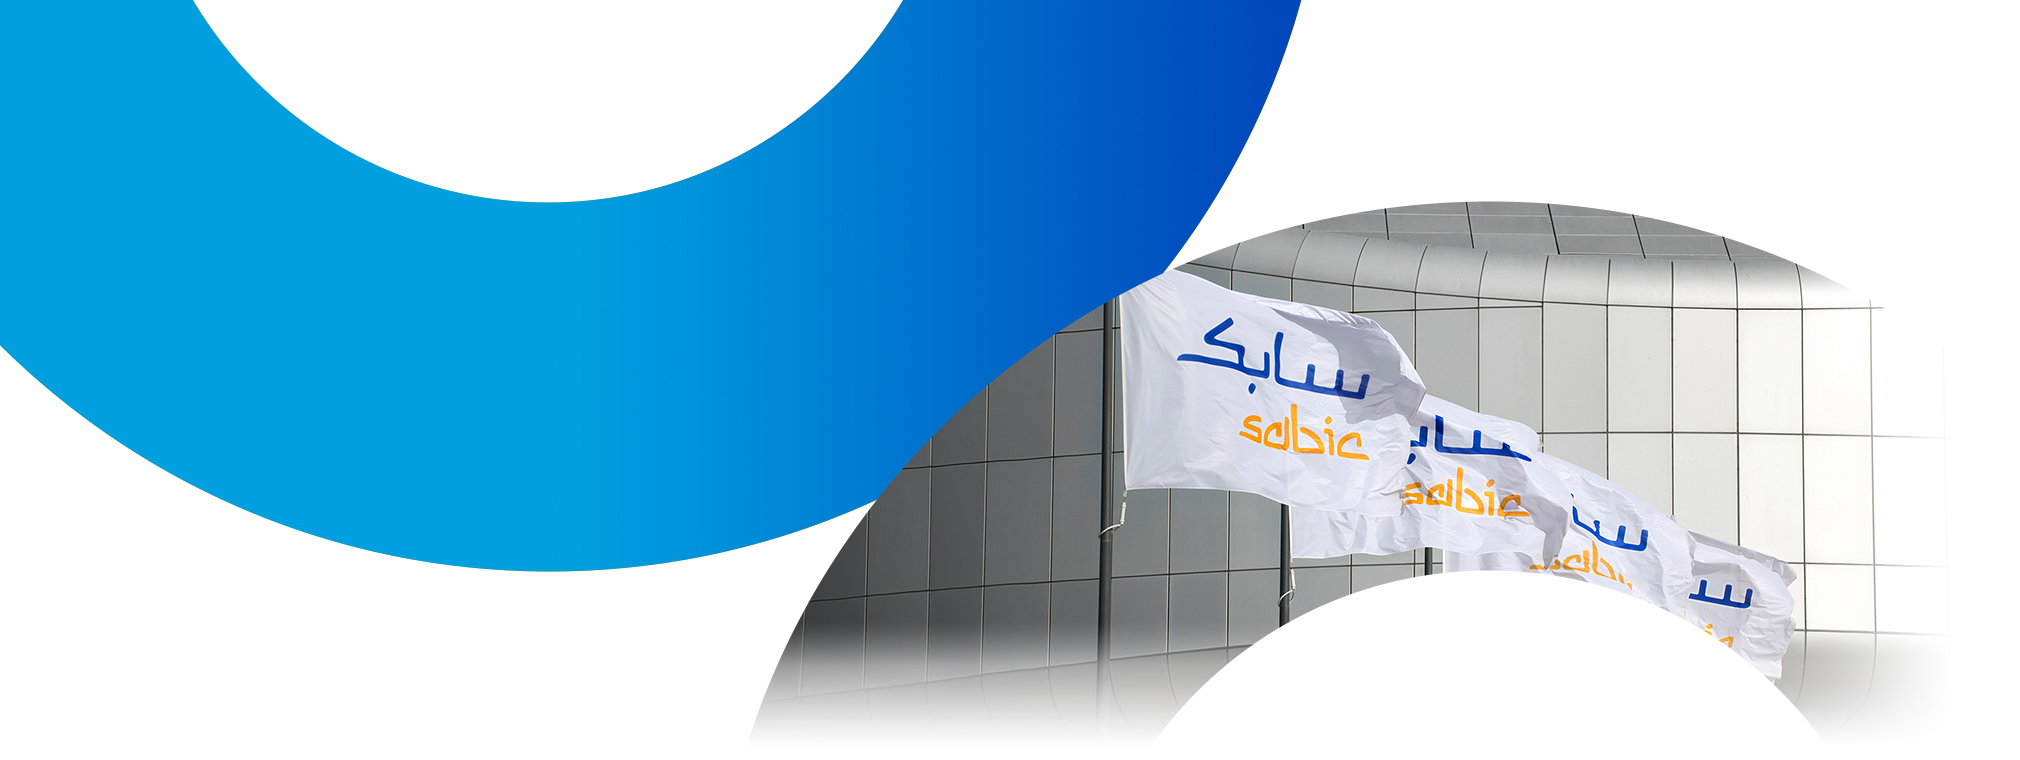 SABIC flags in the wind